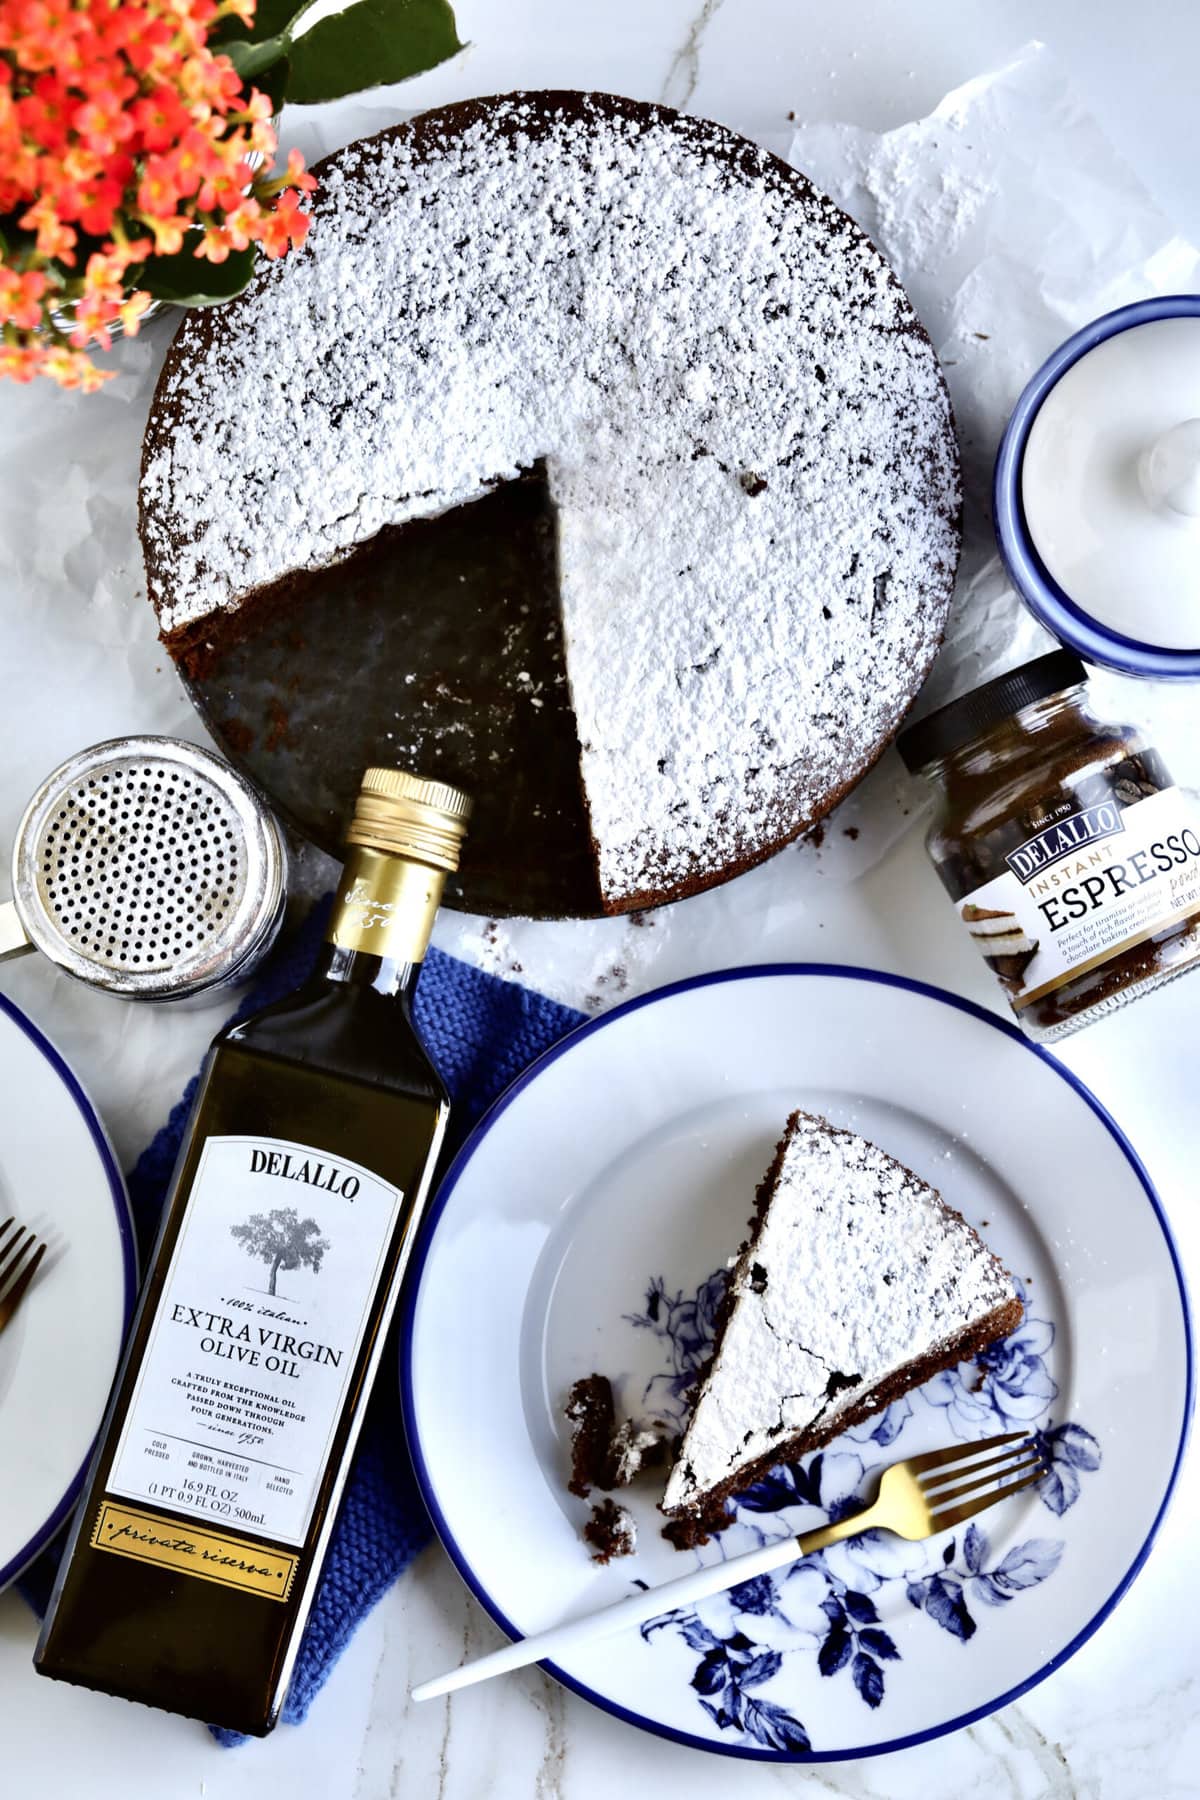 Slice of chocolate cake on a plate with blue flowers. Olive oil bottle and whole cake in background.